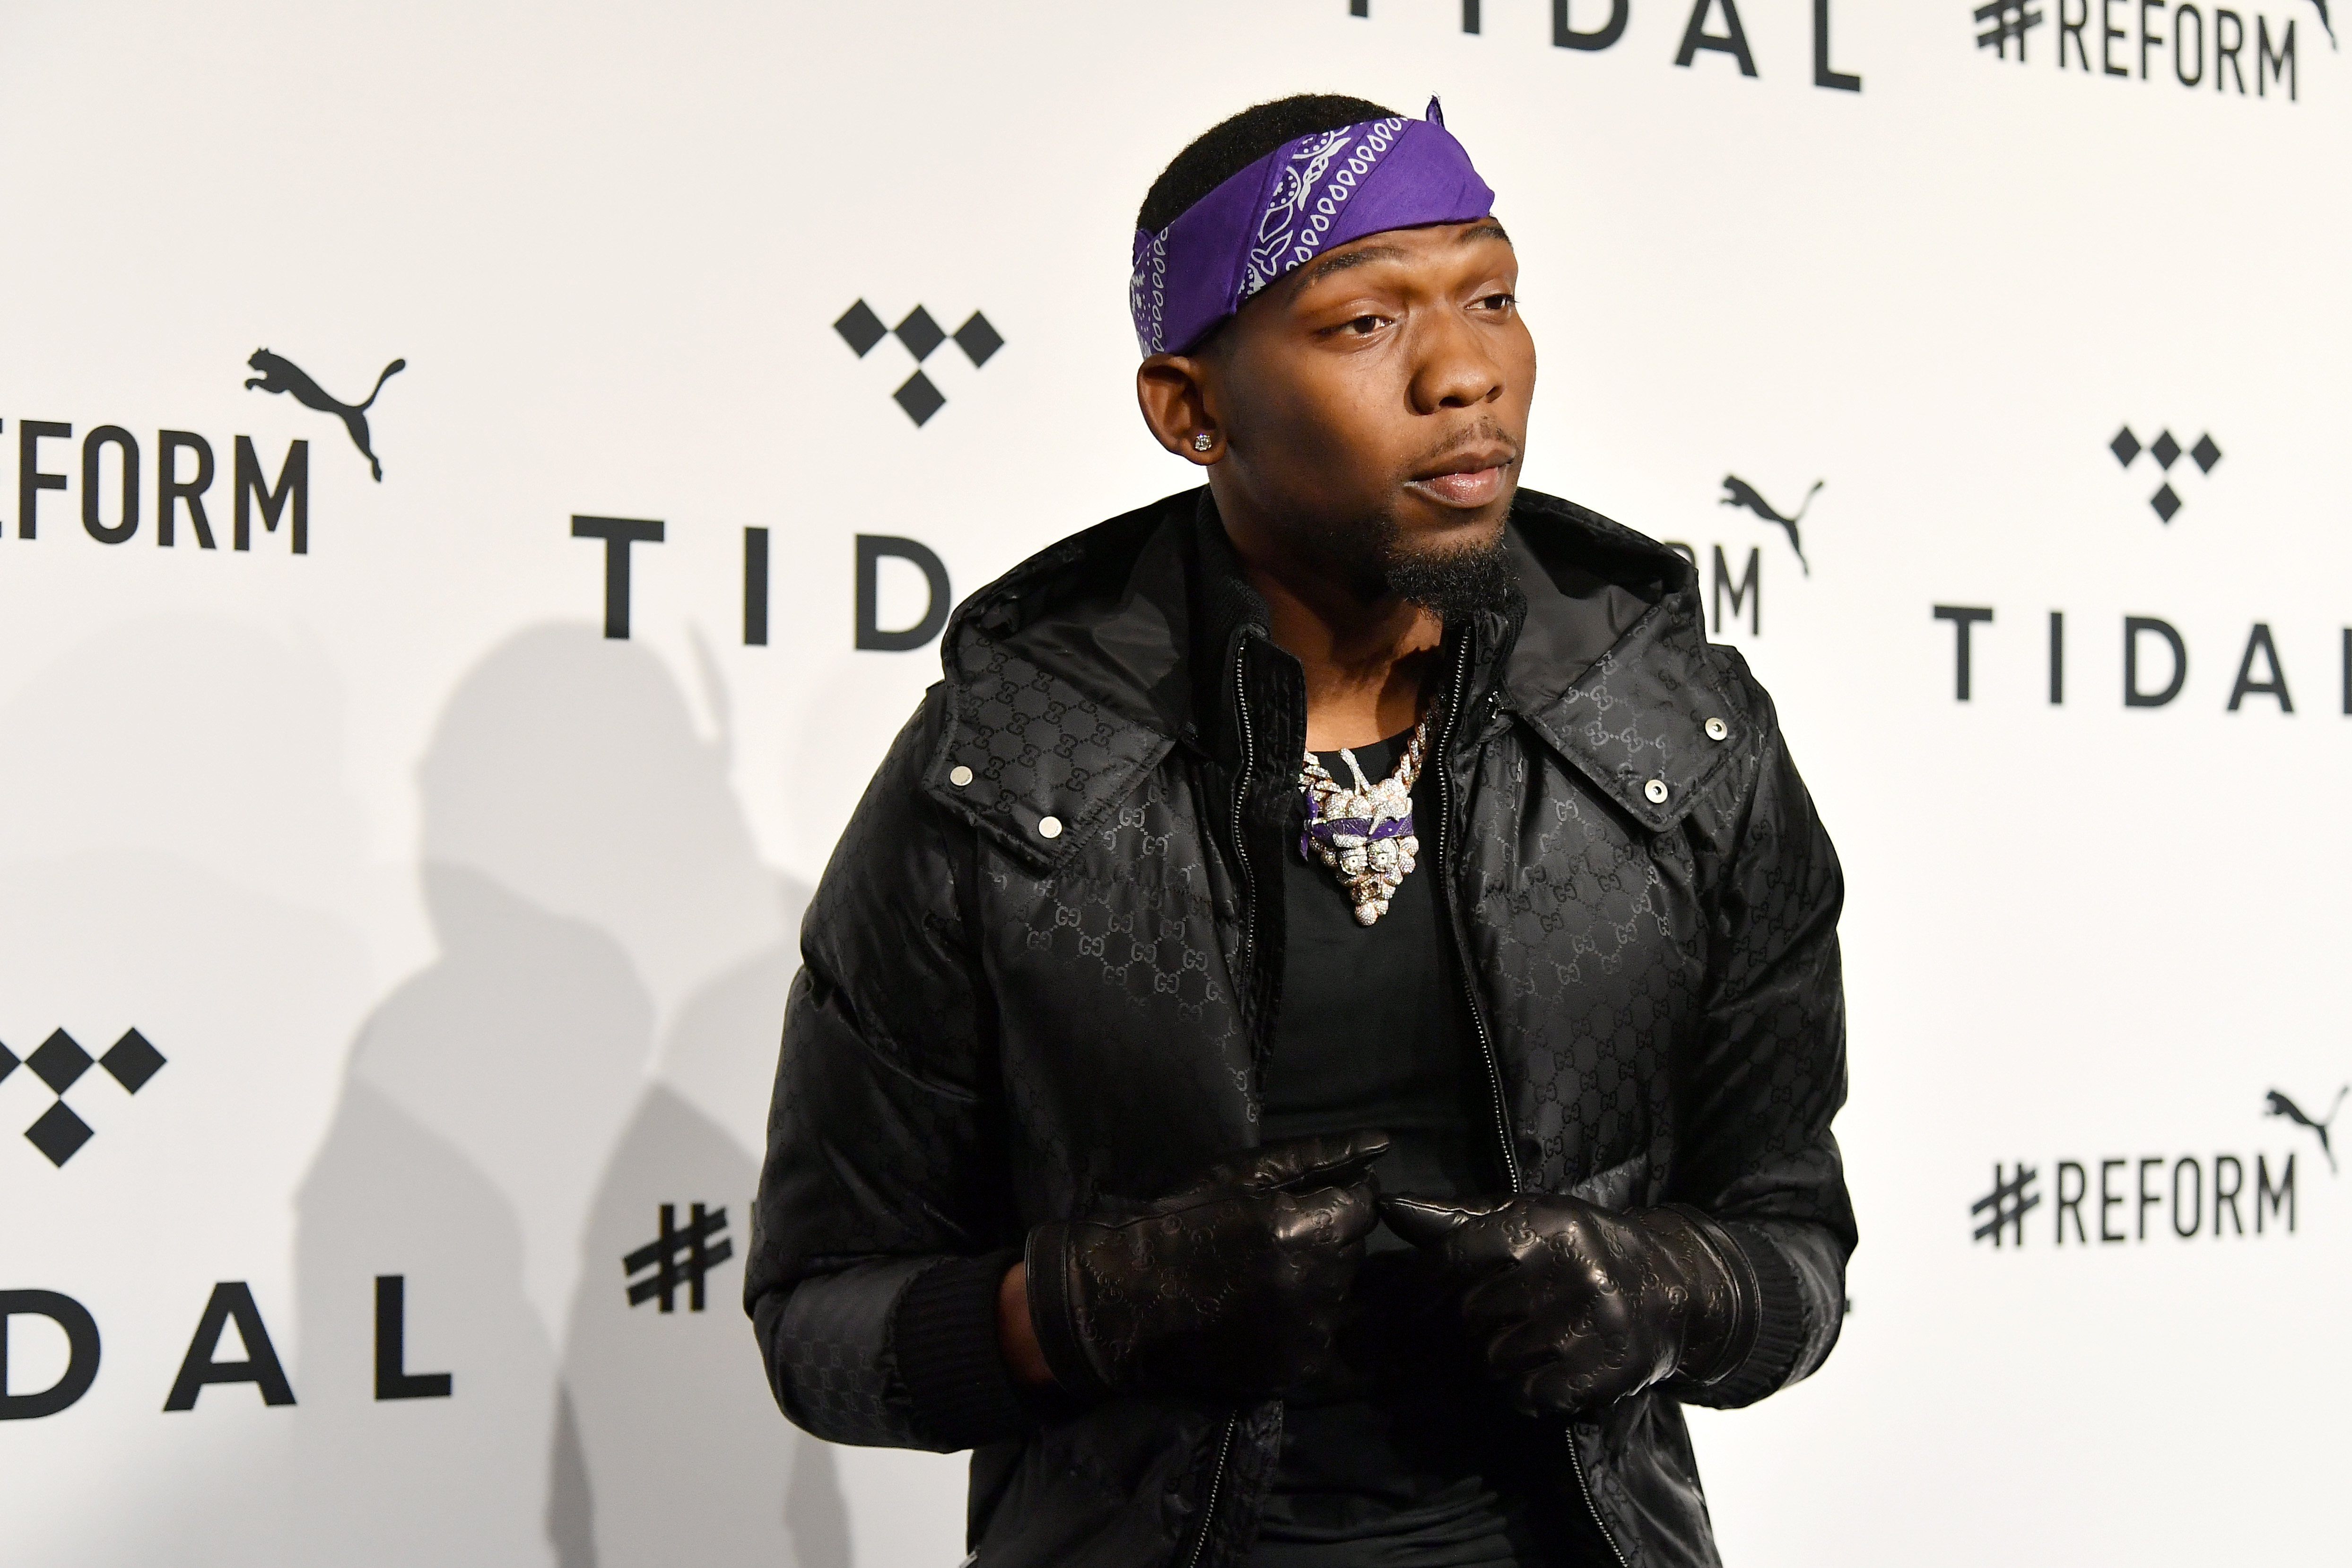 BlocBoy JB Finally Sues Fortnite For Stealing “Shoot” Dance: Report